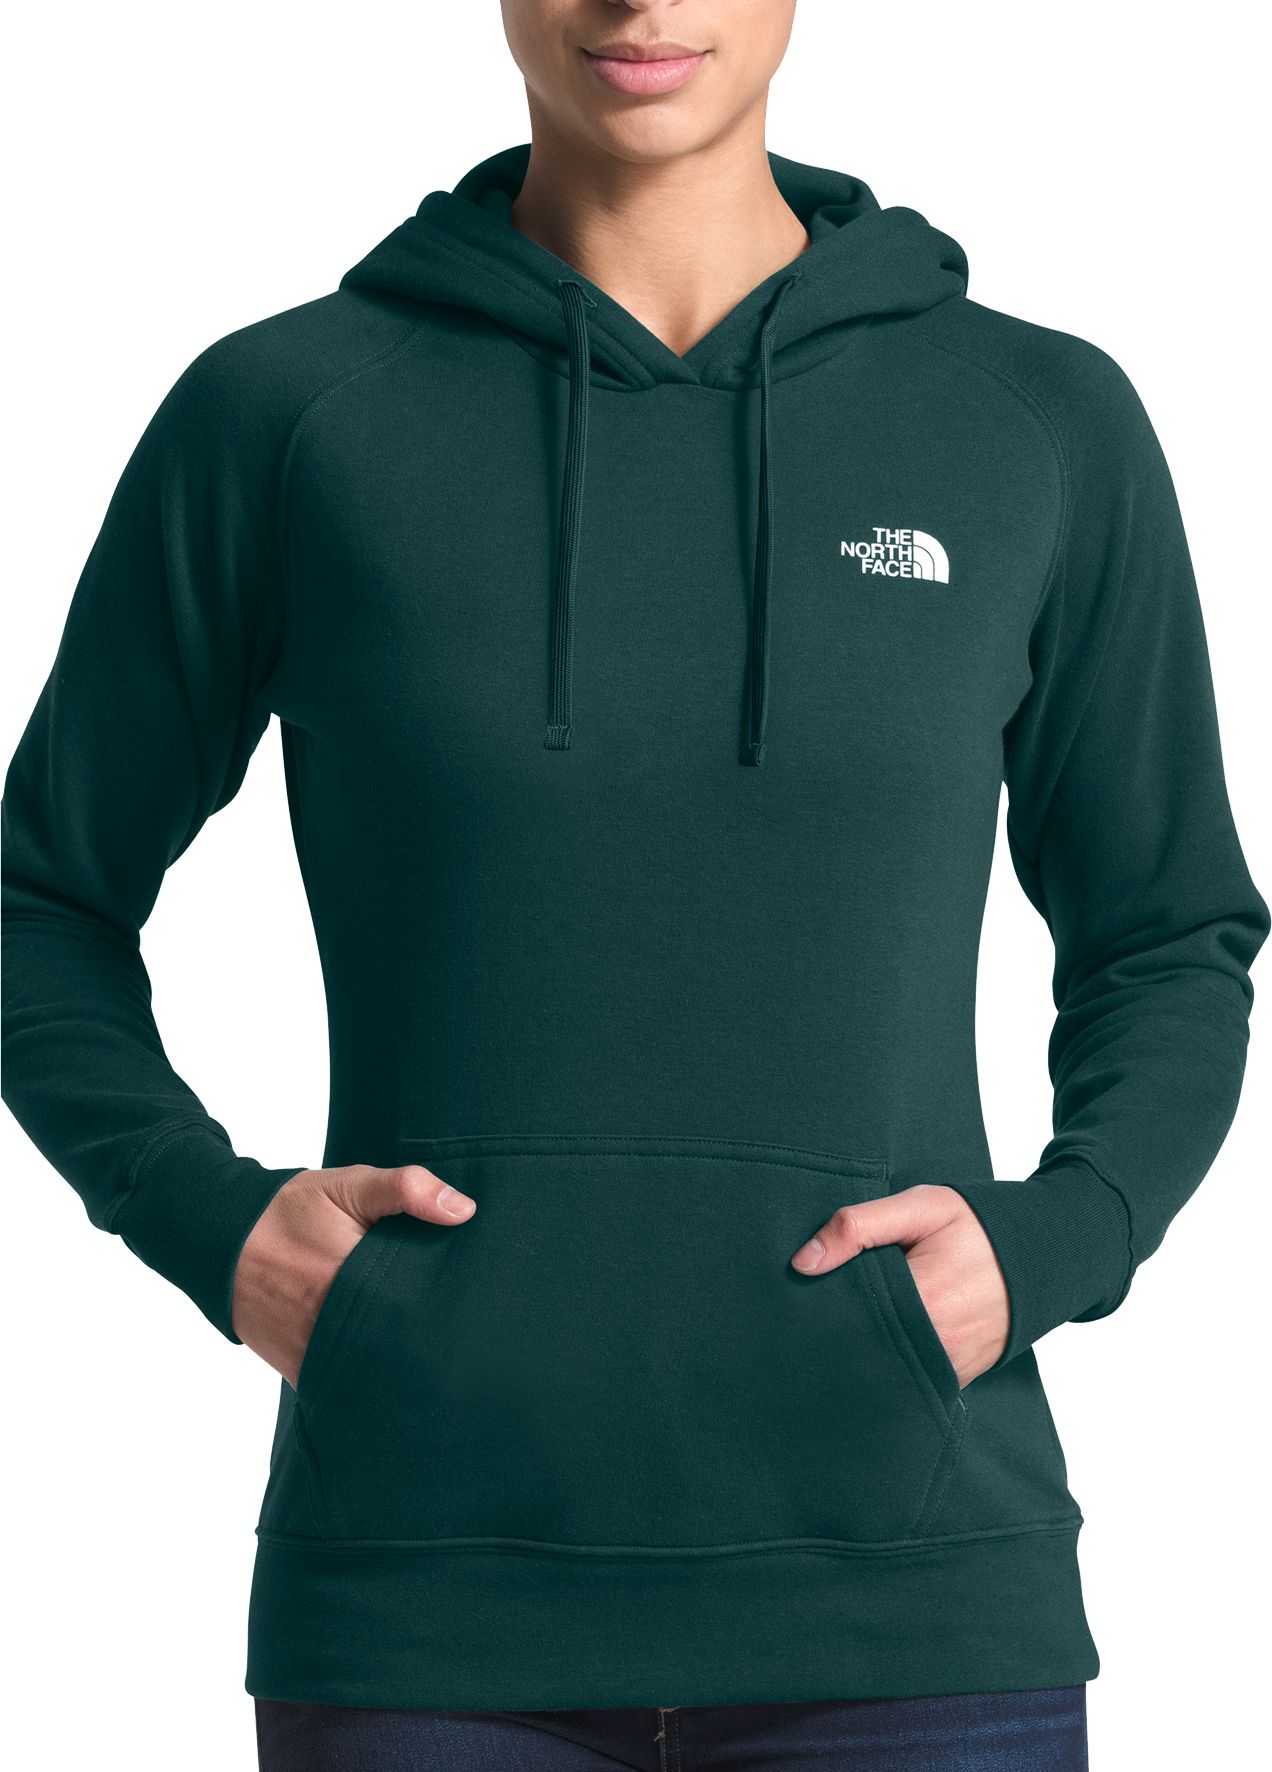 north face pullover hoodie women's 